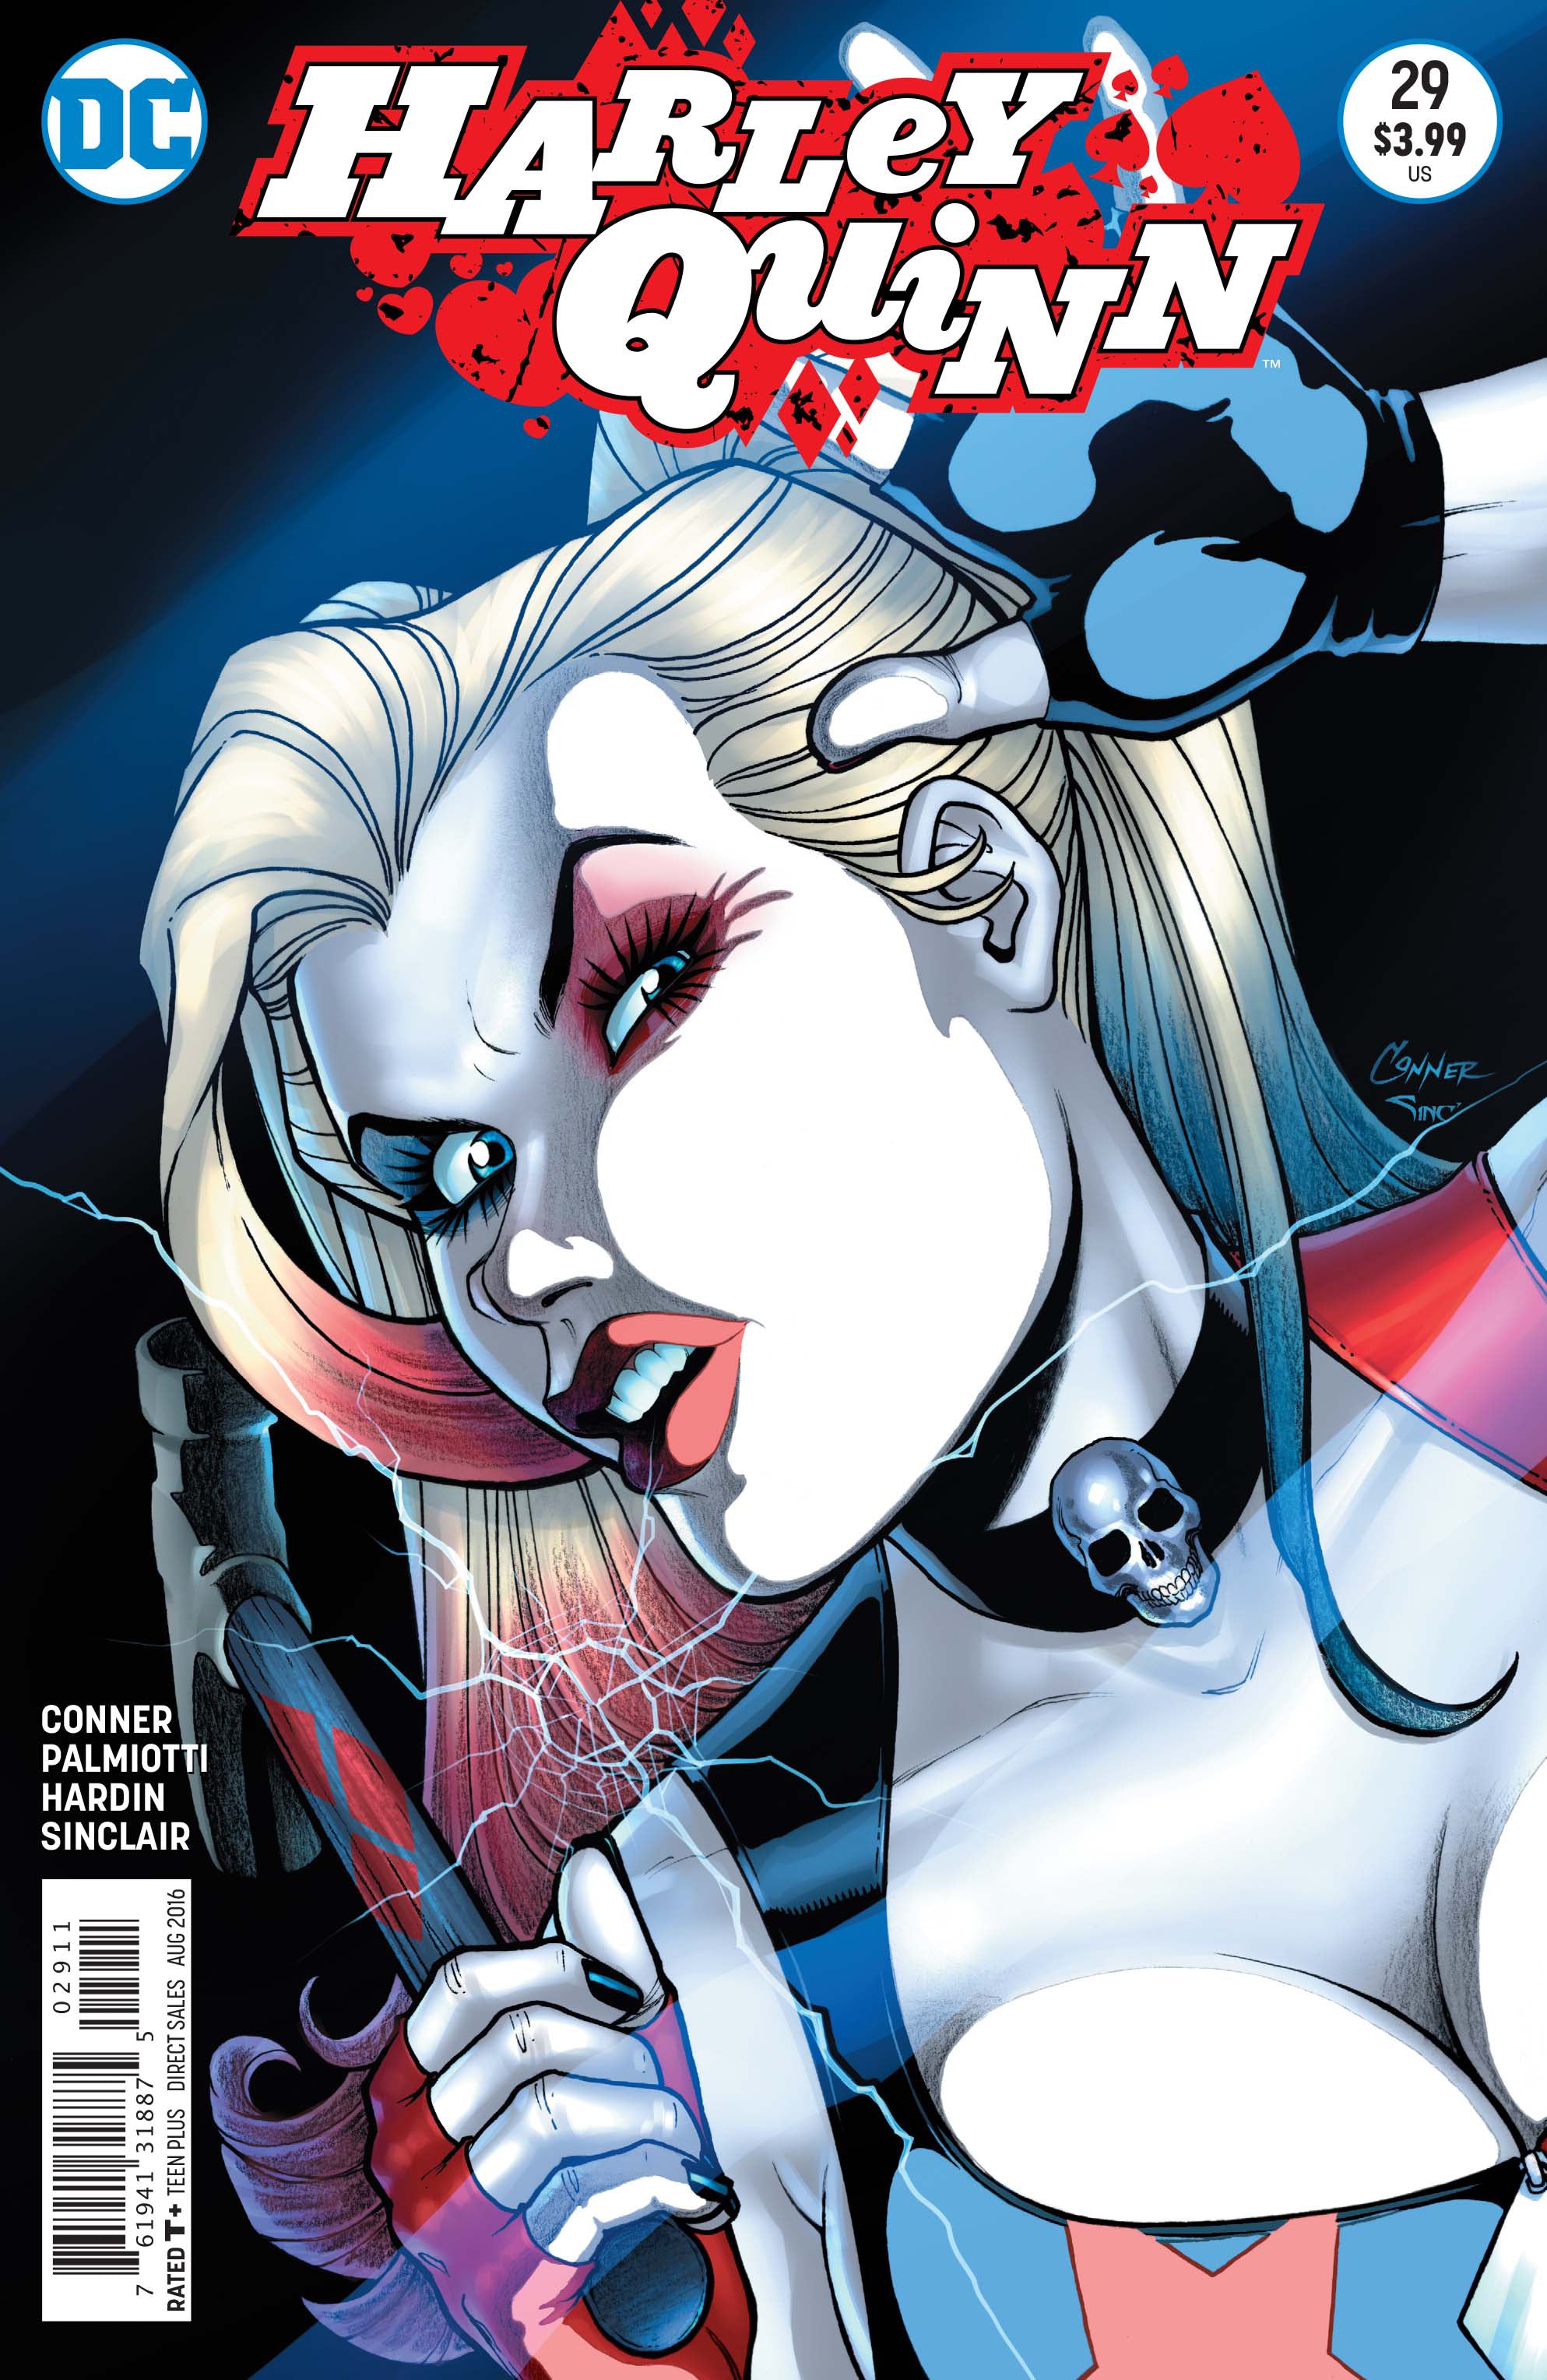 HARLEY QUINN Vol 3 #29 | Game Master's Emporium (The New GME)